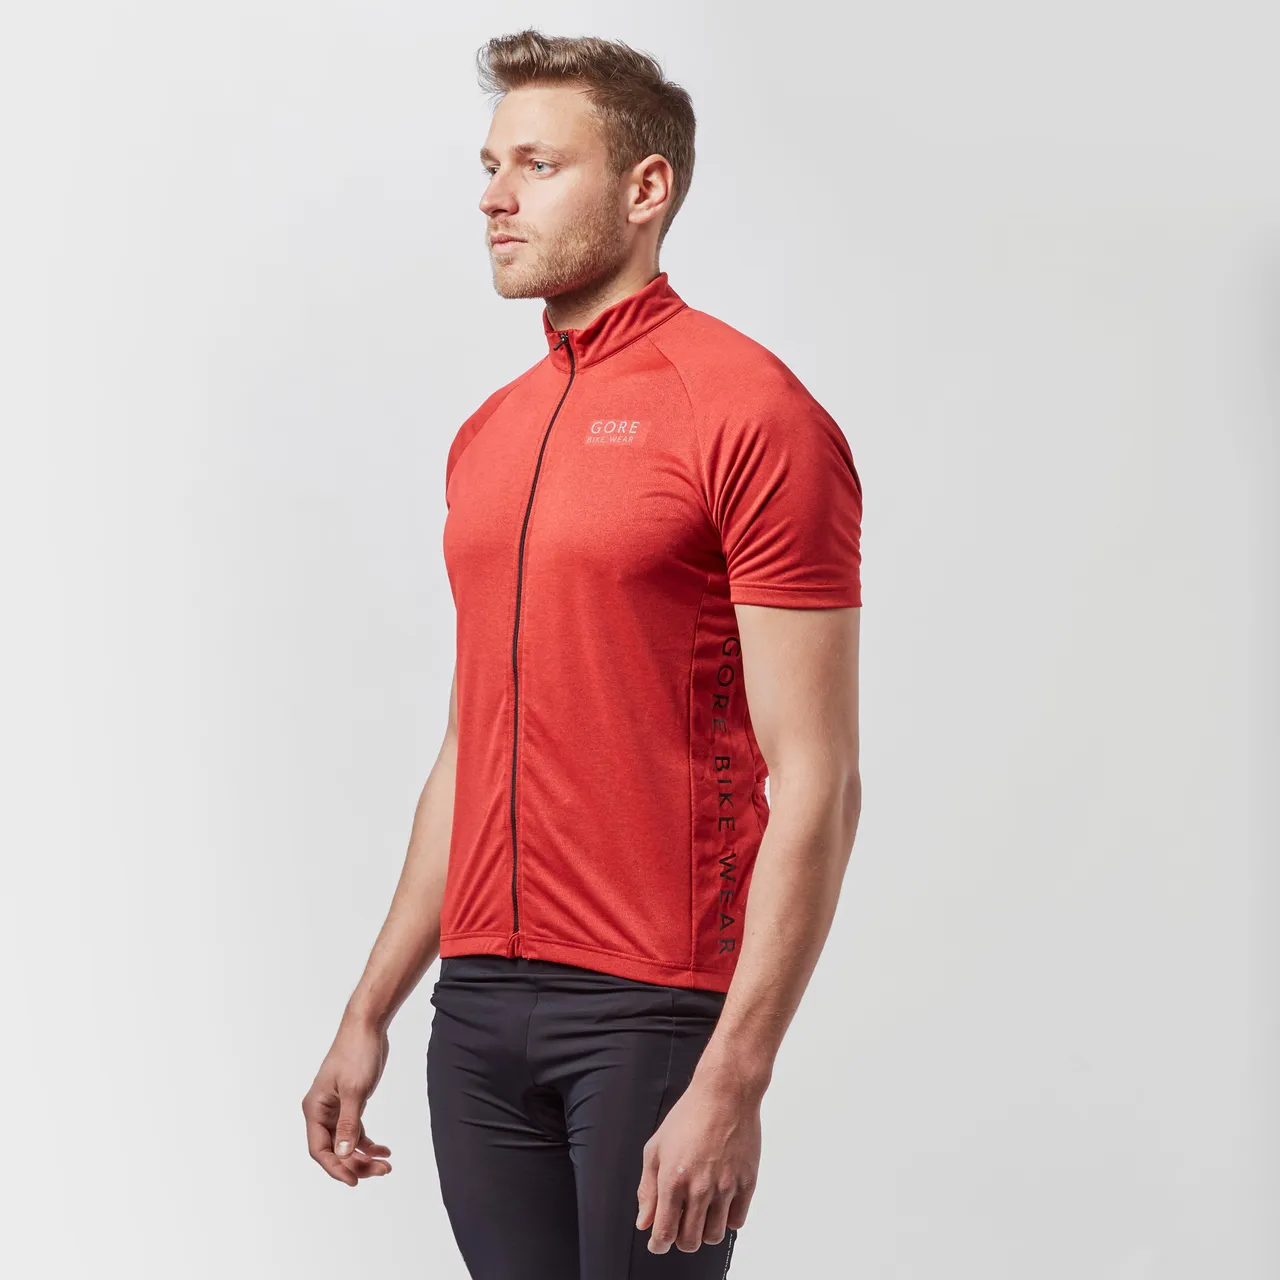 Men's Element 2.0 Cycling Jersey, Red